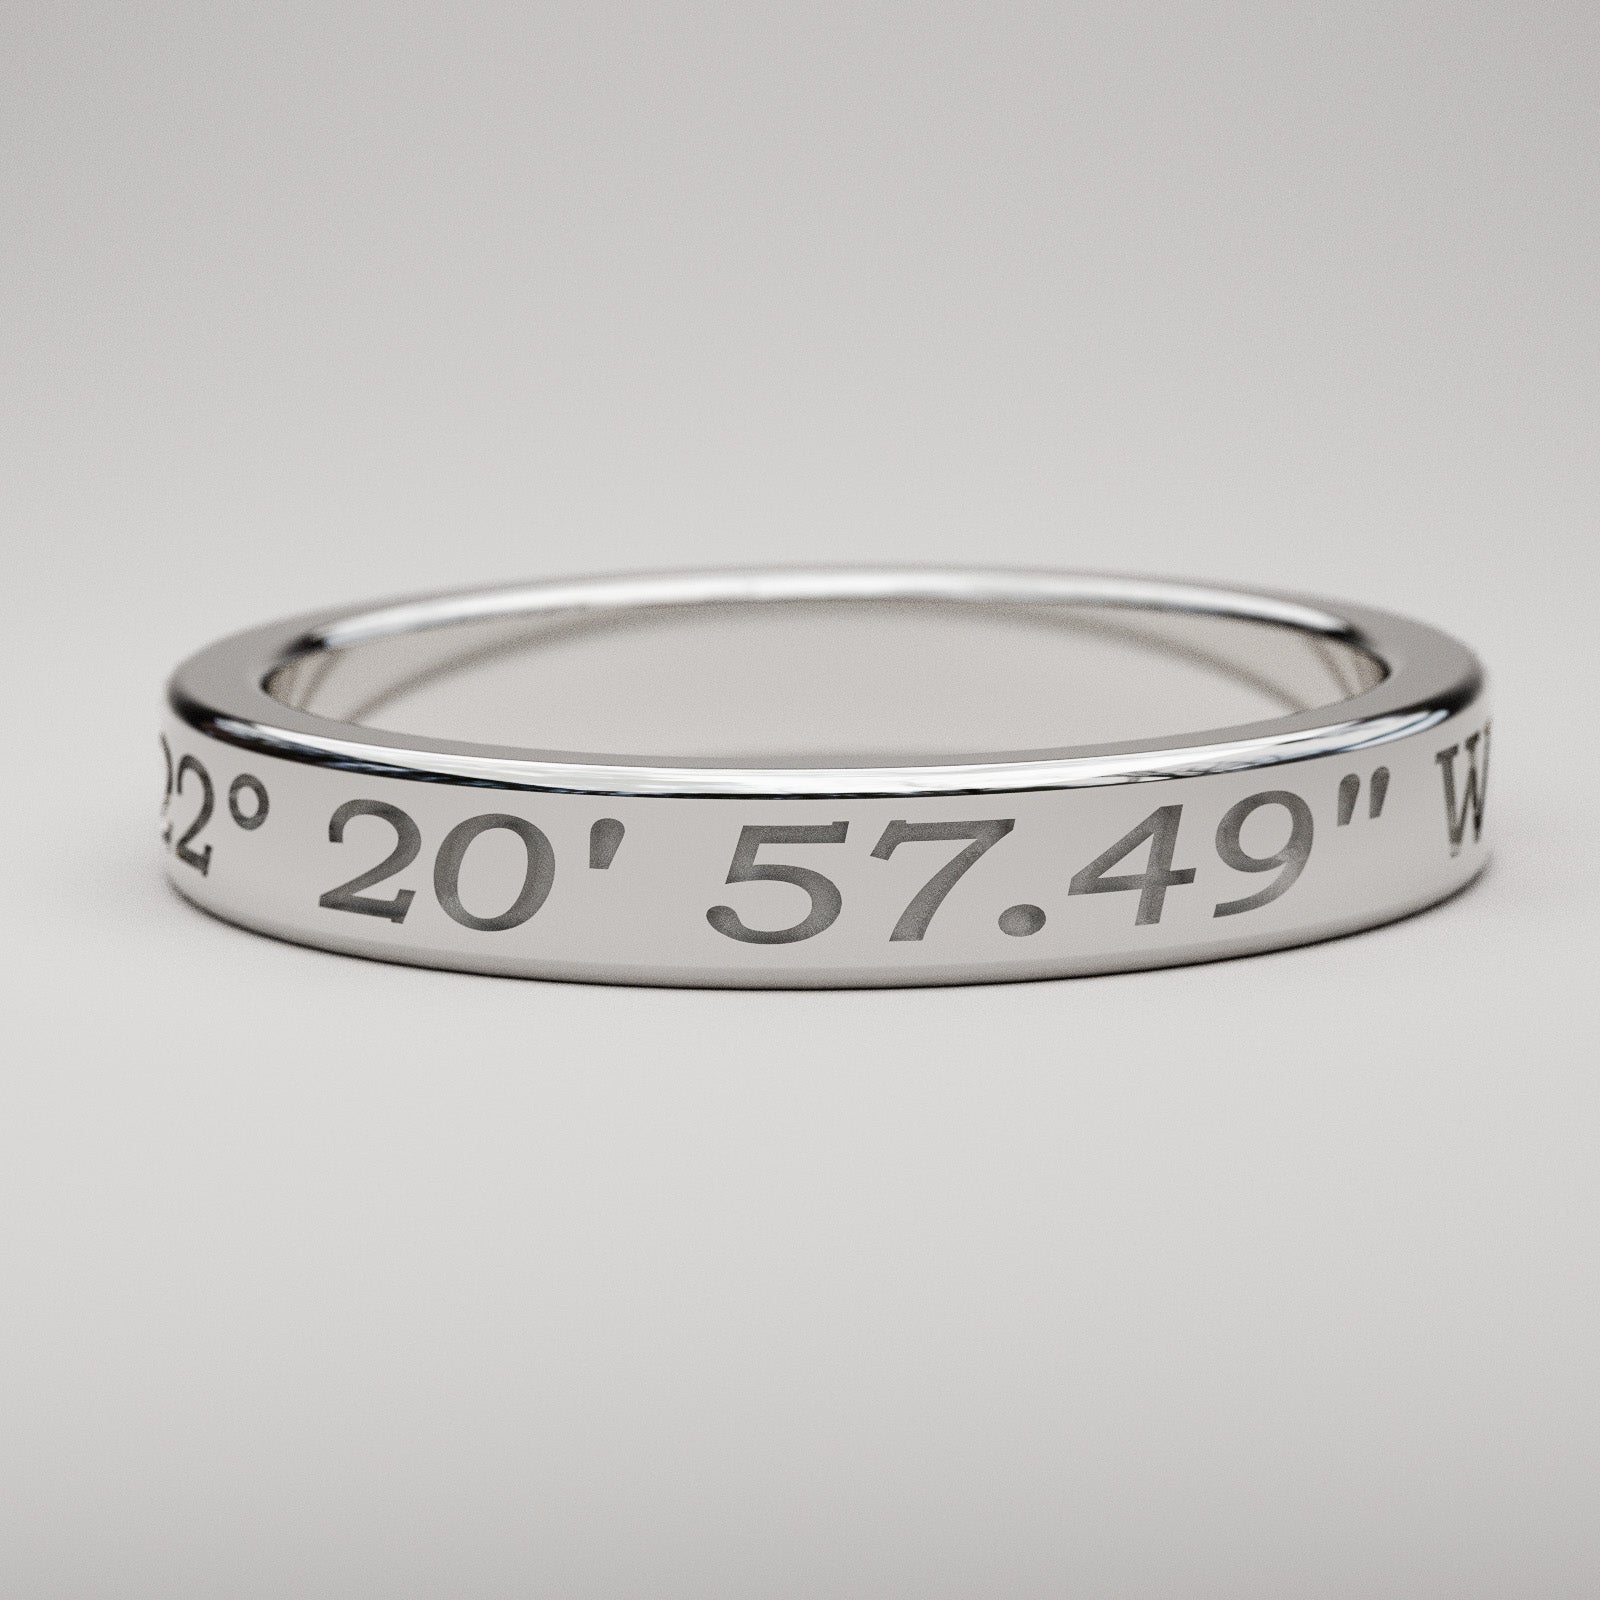 Personalized latitude and longitude coordinates ring in white gold